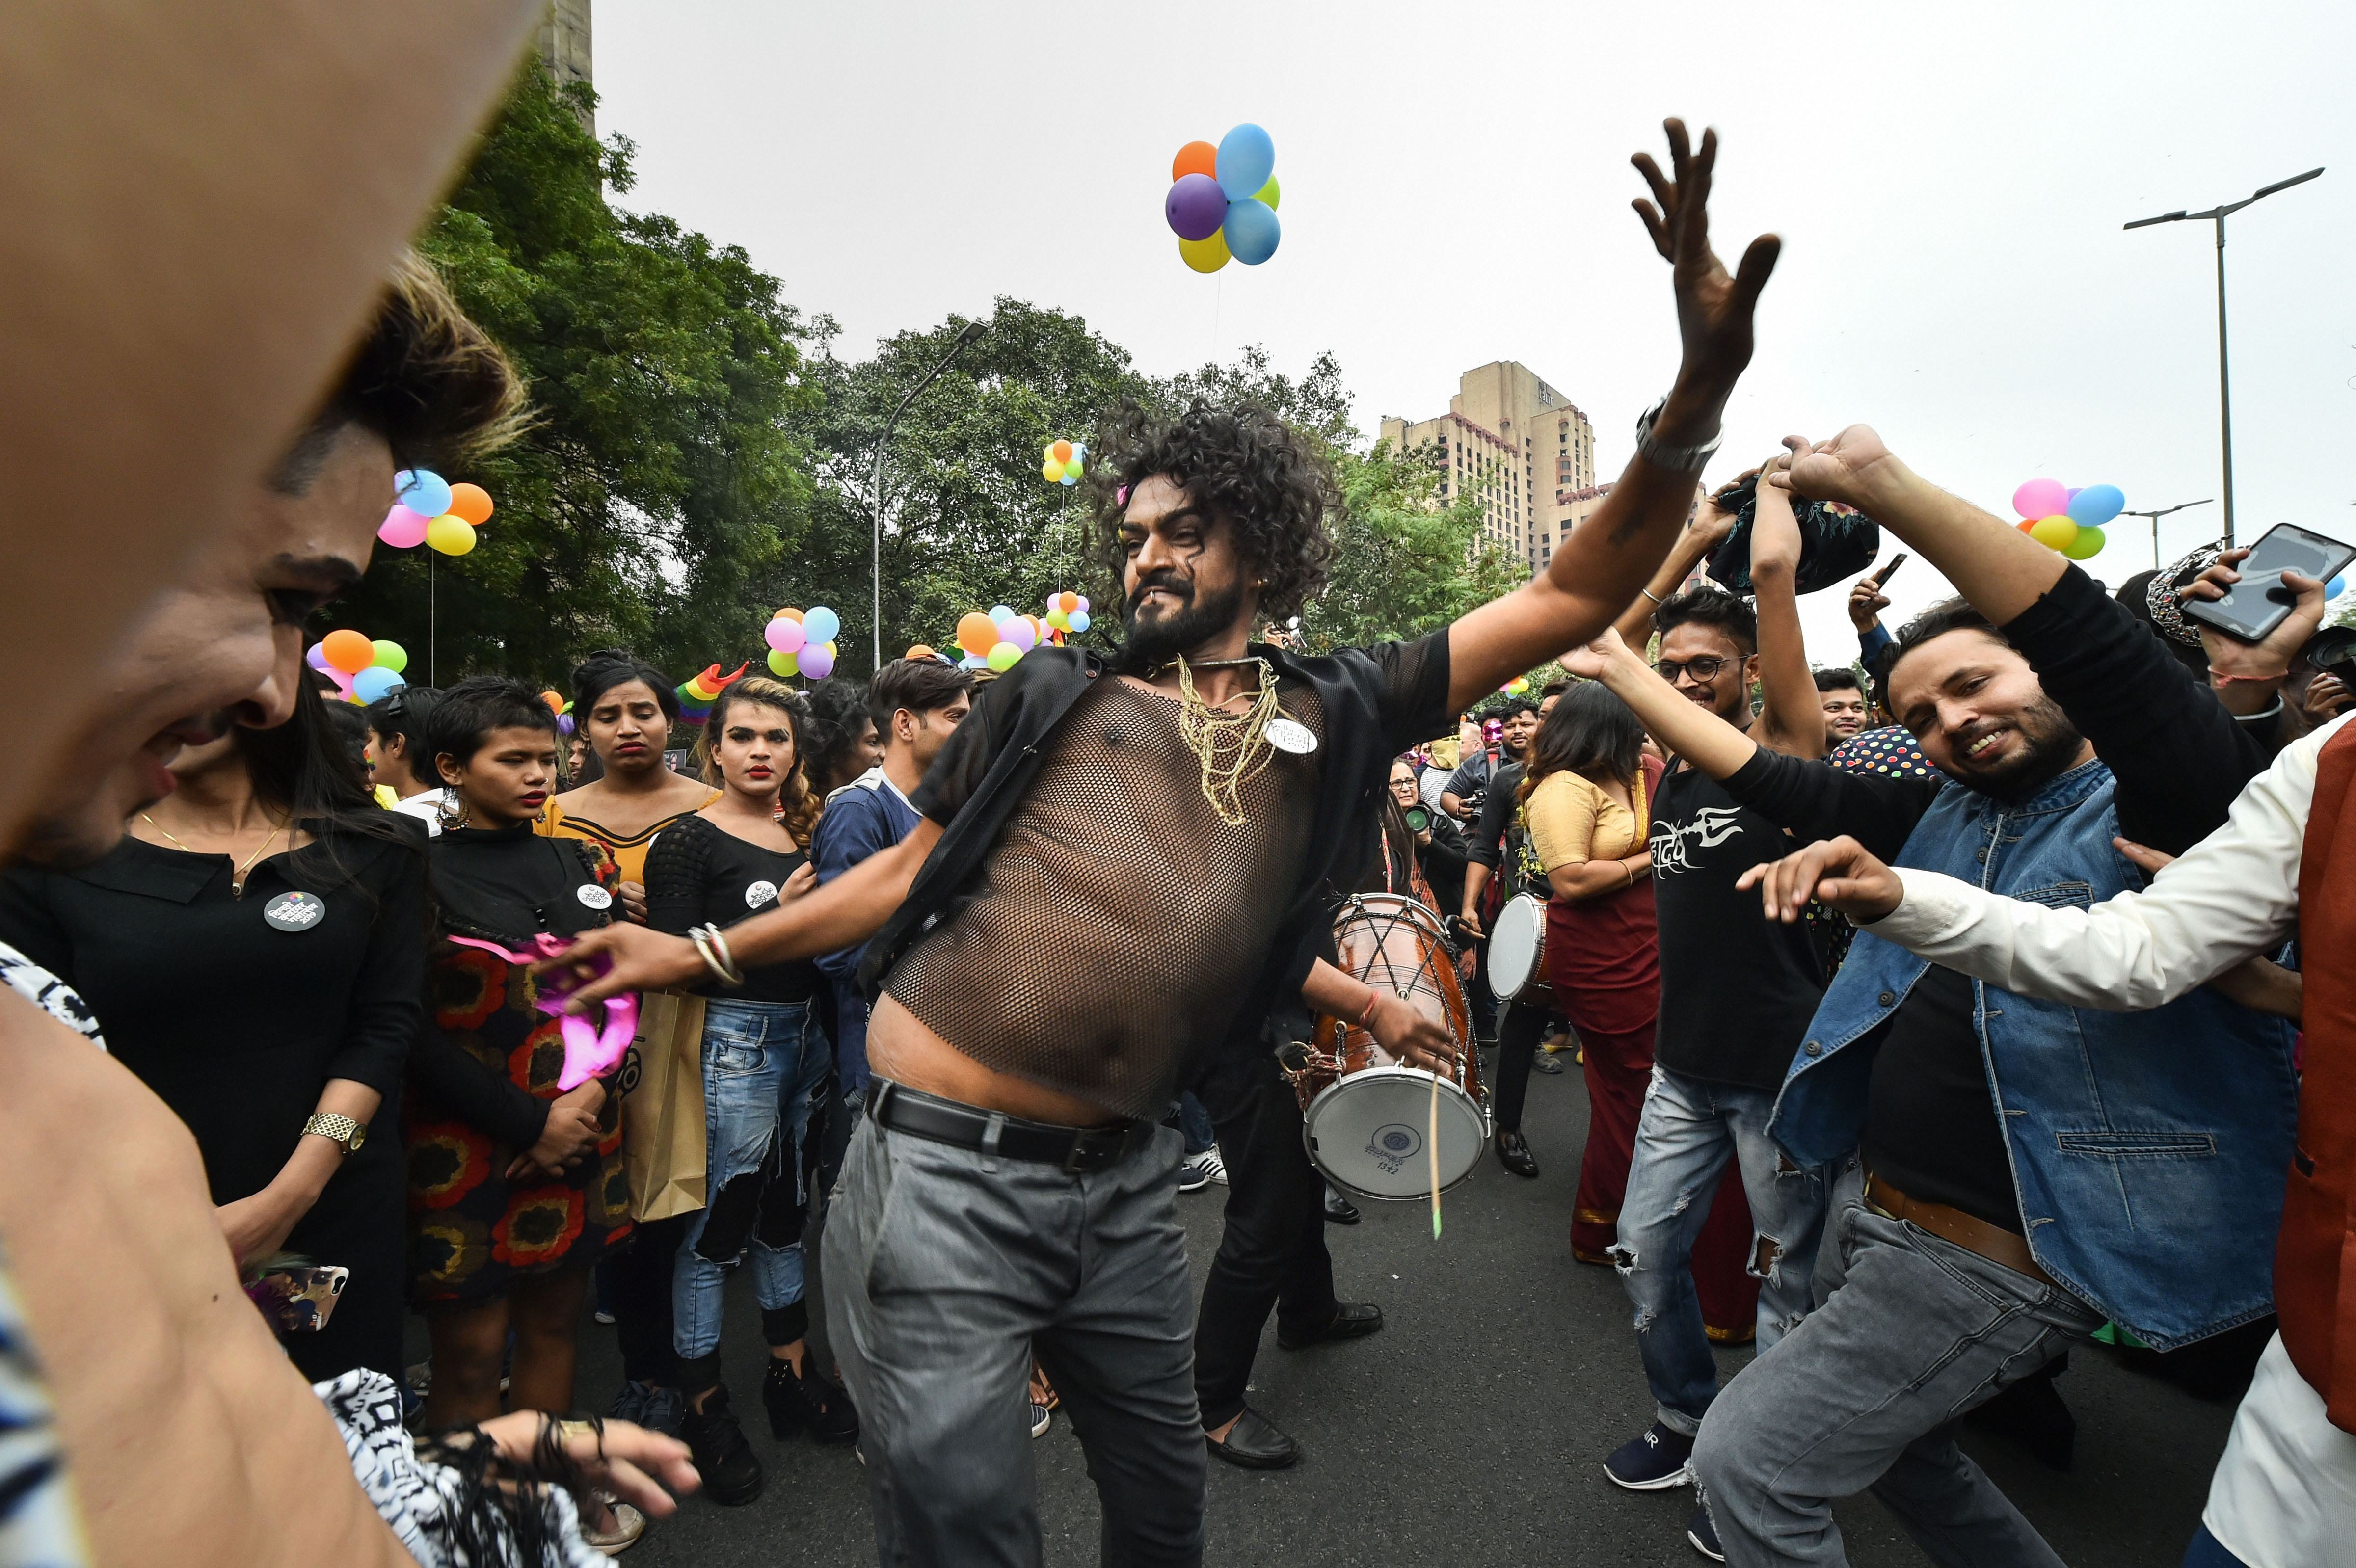 Members of the LGBTQ community and their supporters march during the annual Delhi Queer Pride Parade in New Delhi on Sunday, November 24, 2019.